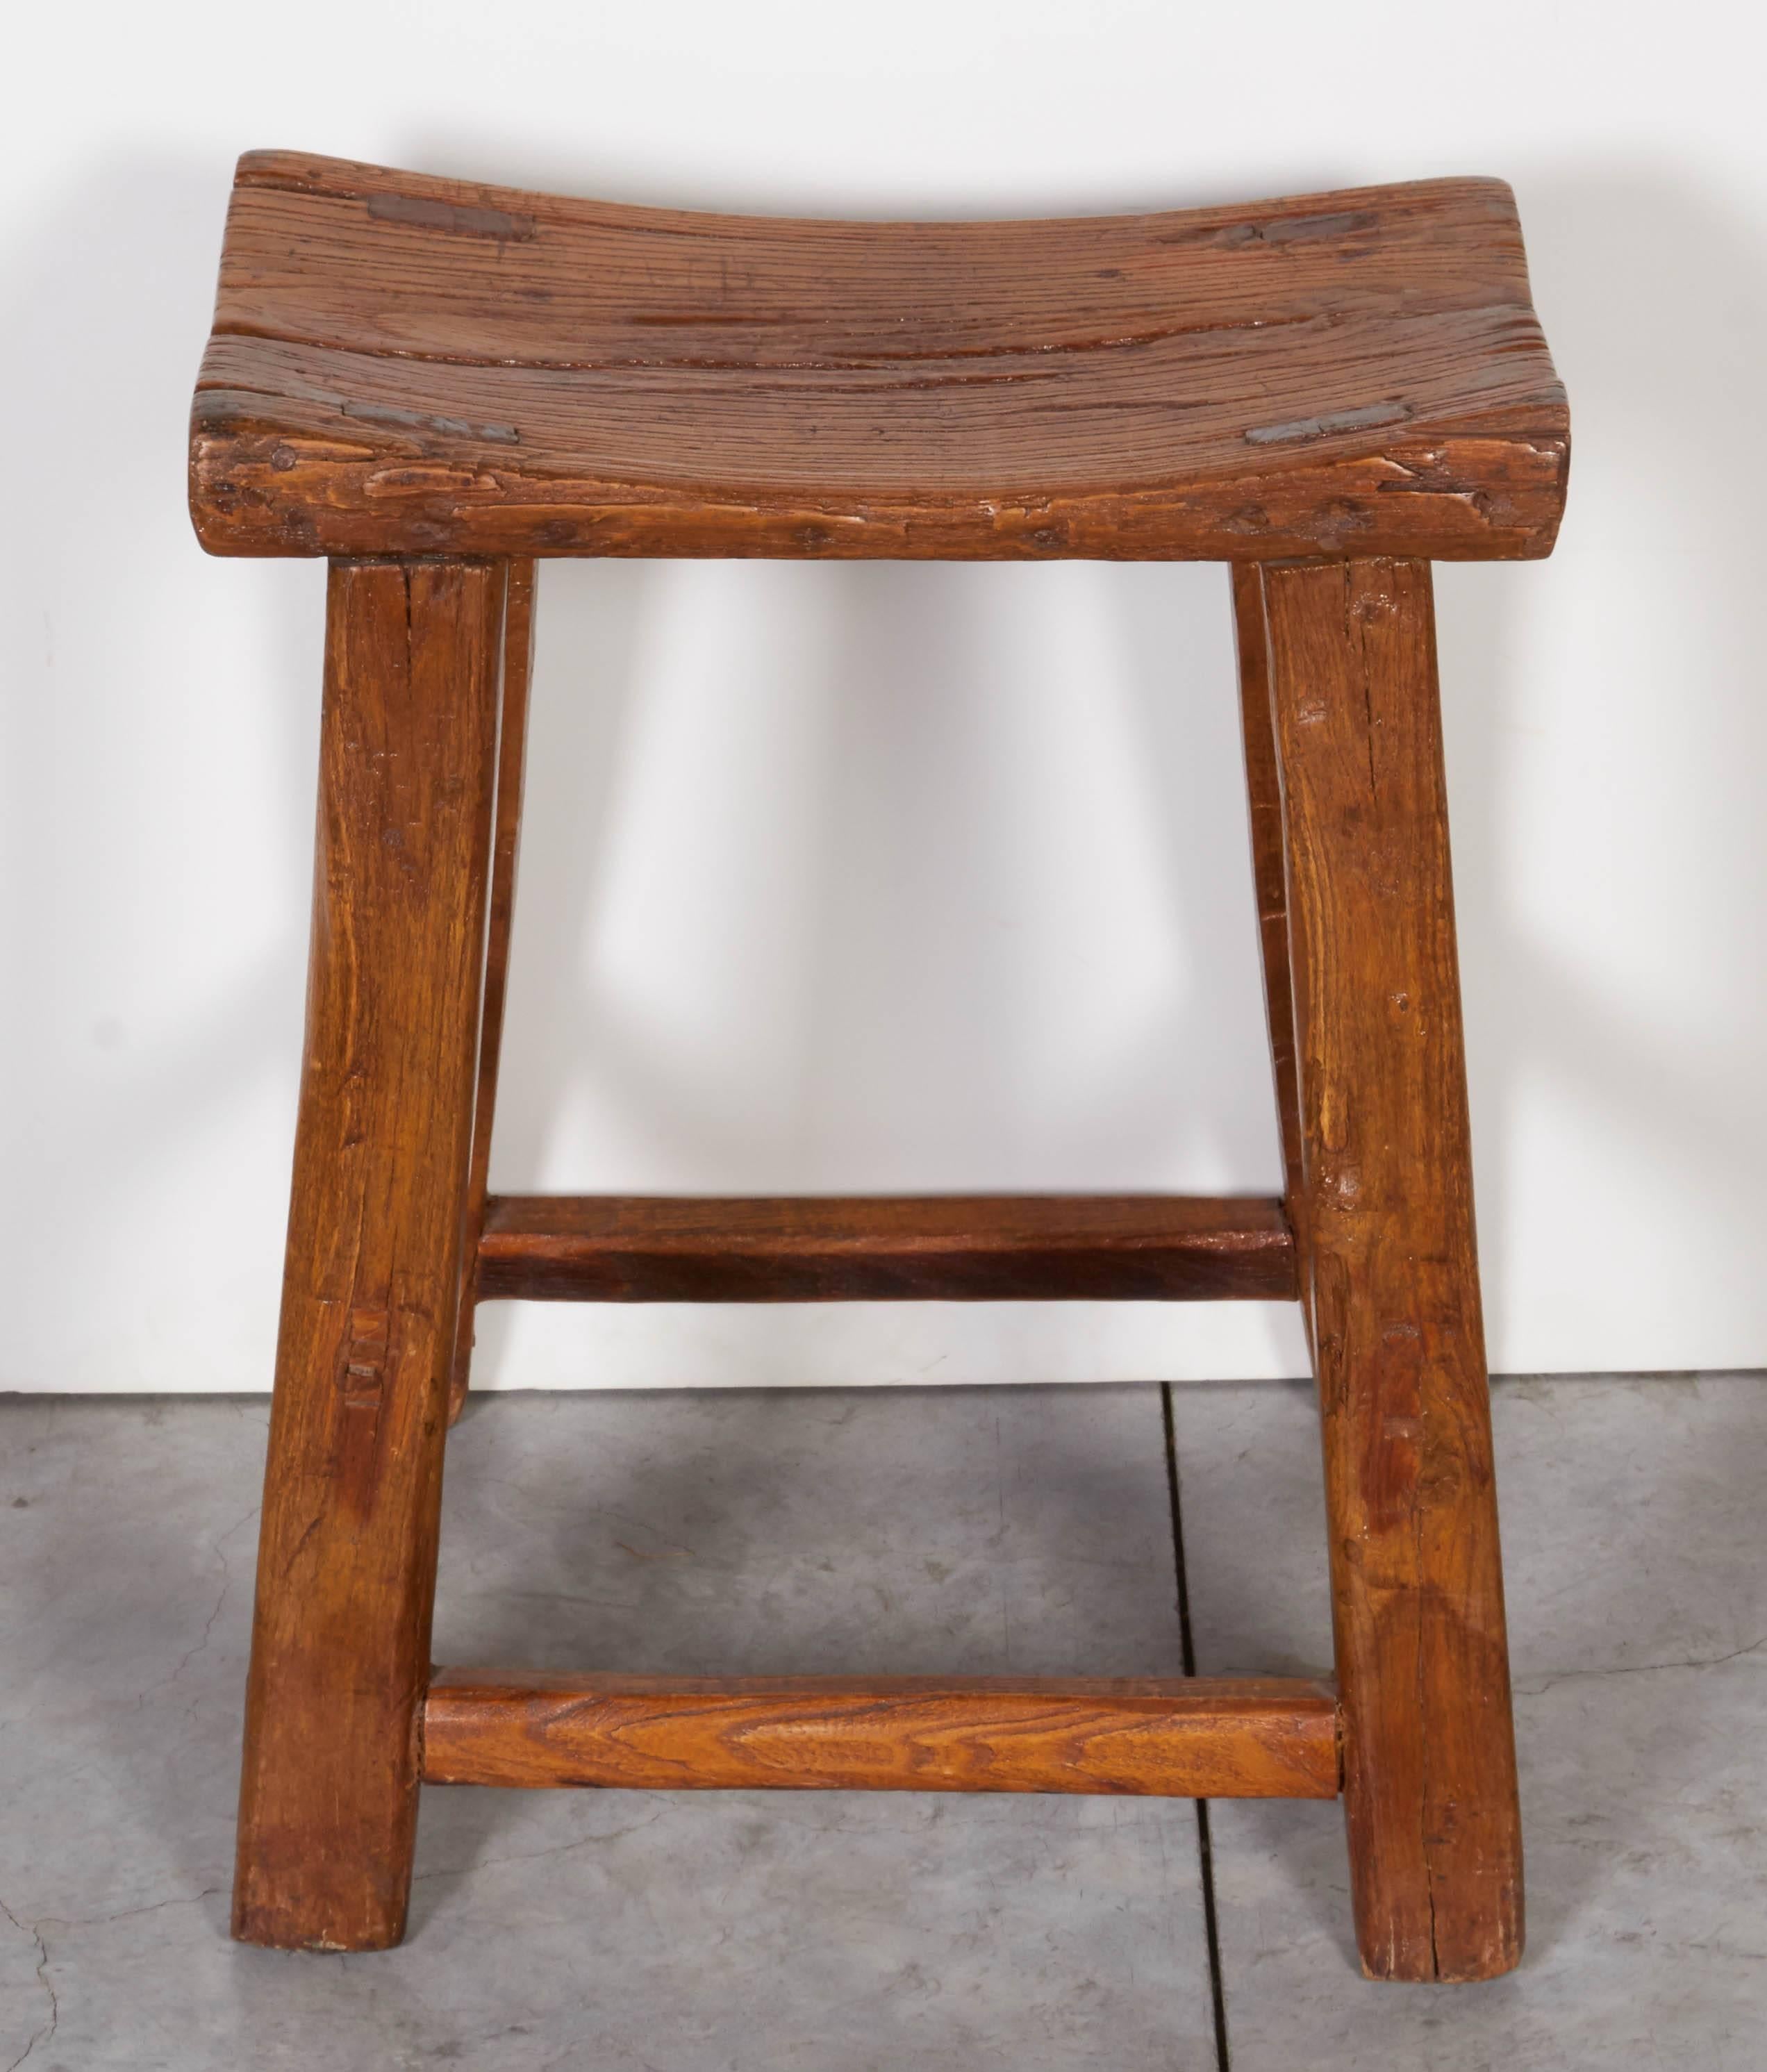 A graceful and classically shaped antique Chinese stool with great patina that reflects it's century of history and use. This beautiful stool not only provides seating, but works well as an object in a powder room to display folded towels. From